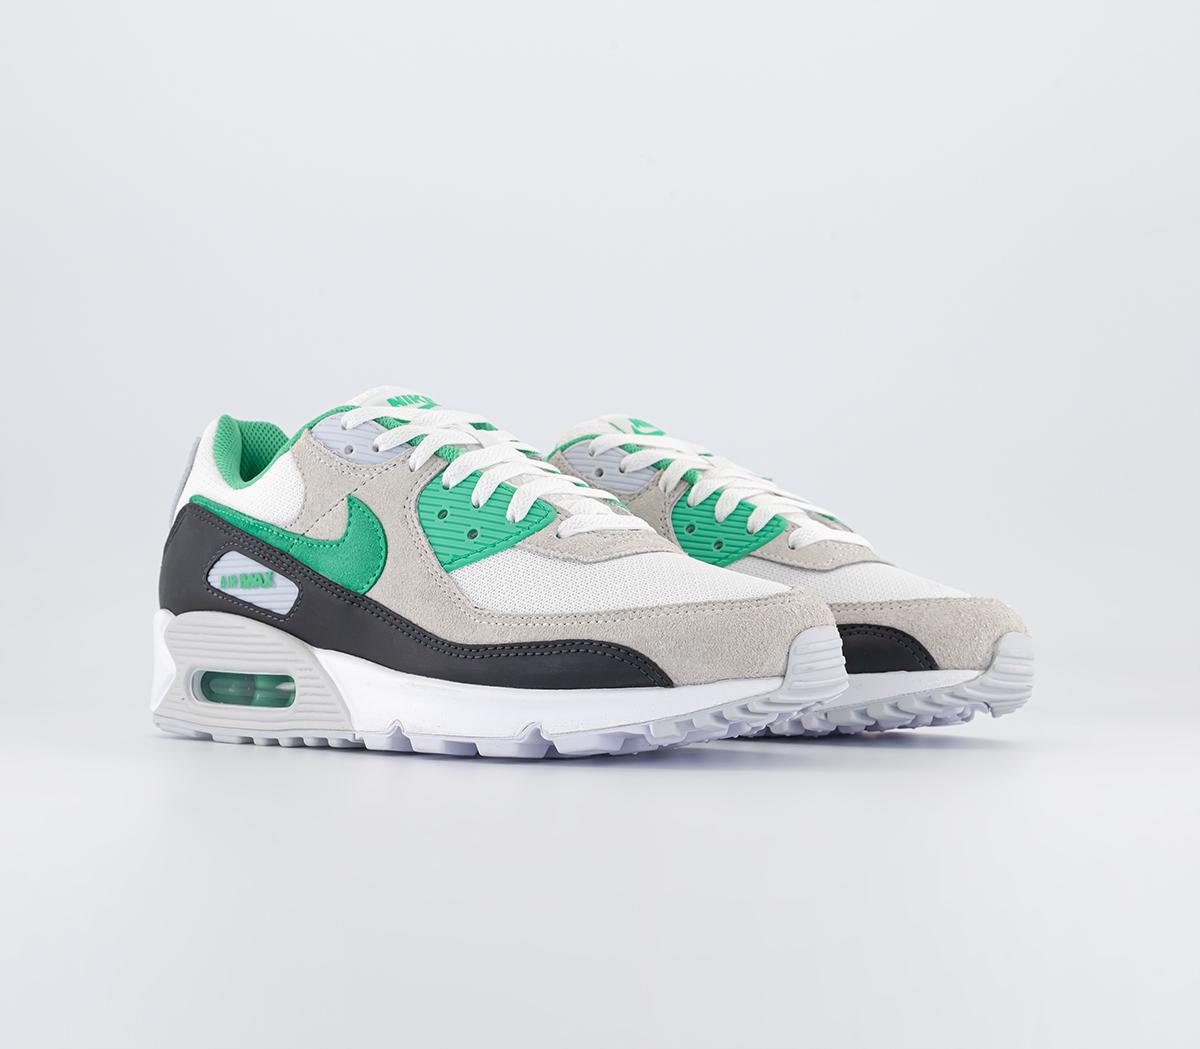 Nike Air Max 90 Trainers White Spring Green Anthracite, 8